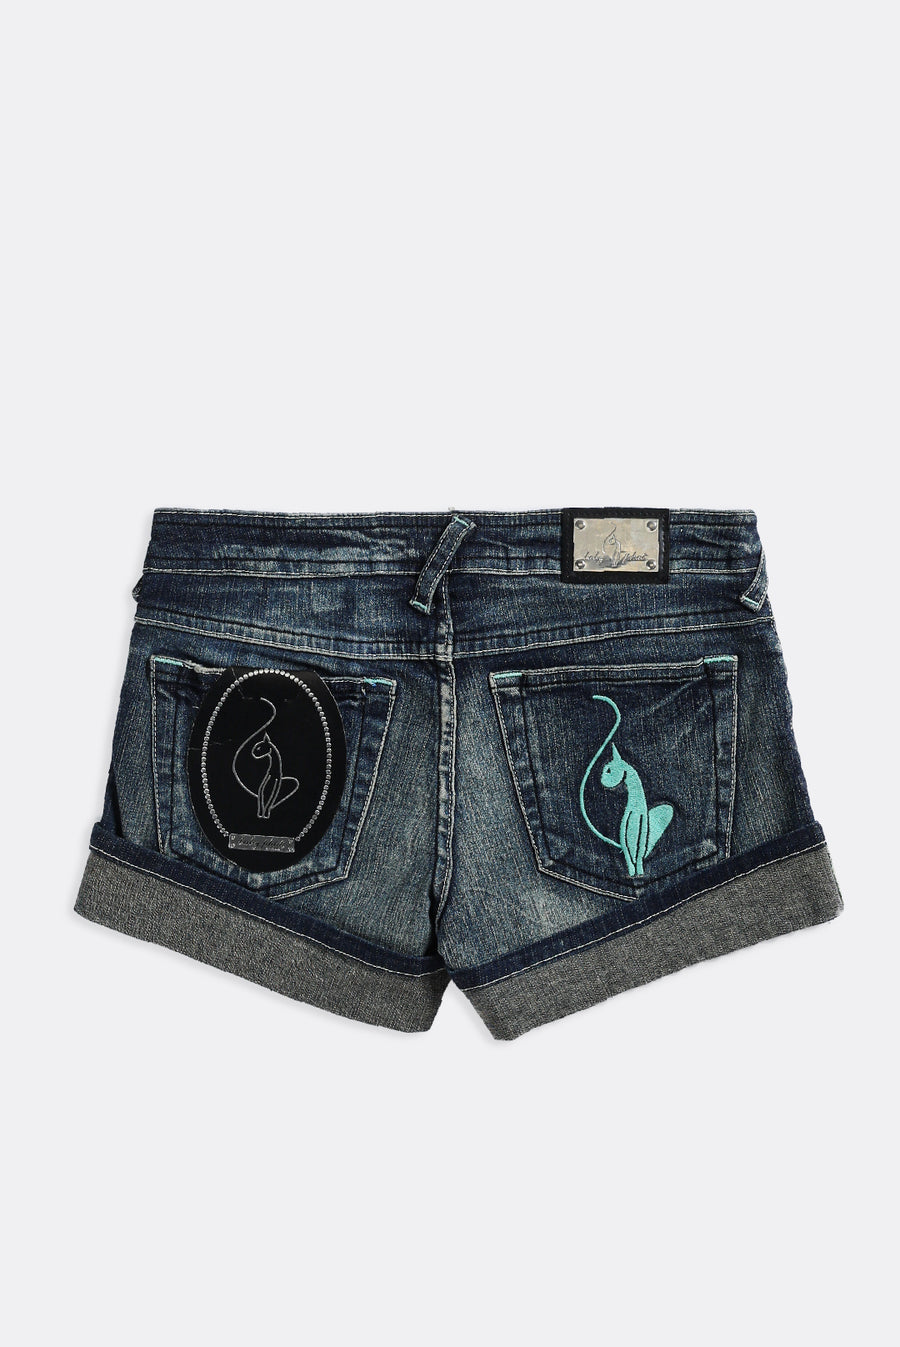 Deadstock Baby Phat Blue Embroidered Denim Shorts - W30, W31